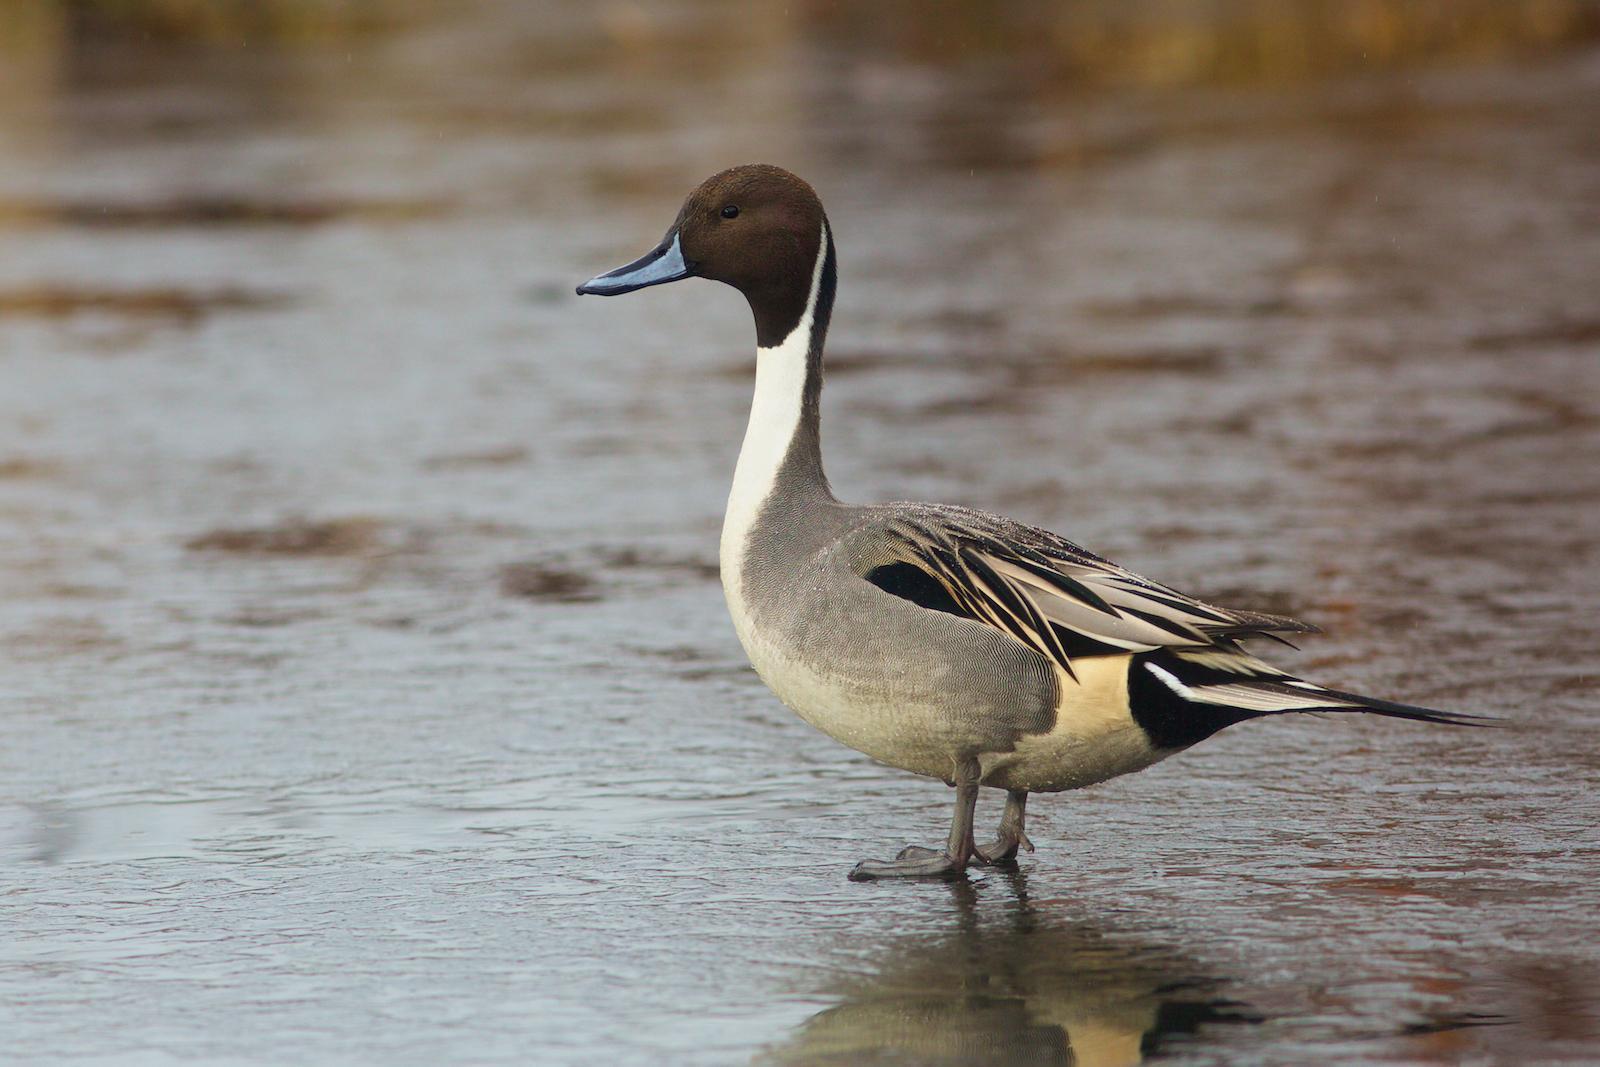 Northern Pintail Photo by Robin Horn